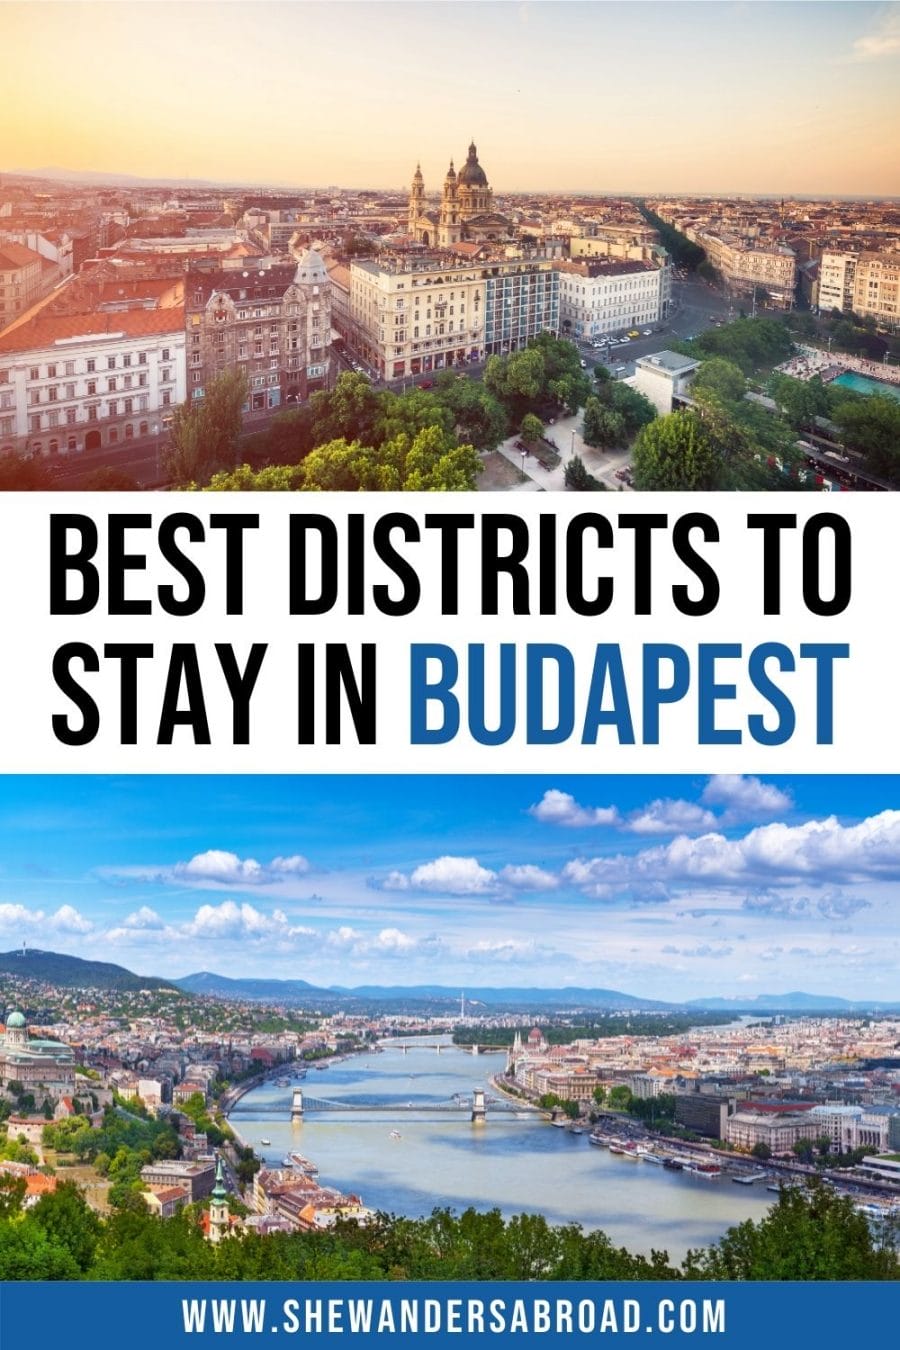 Where to stay in Budapest: Best Districts & Hotels